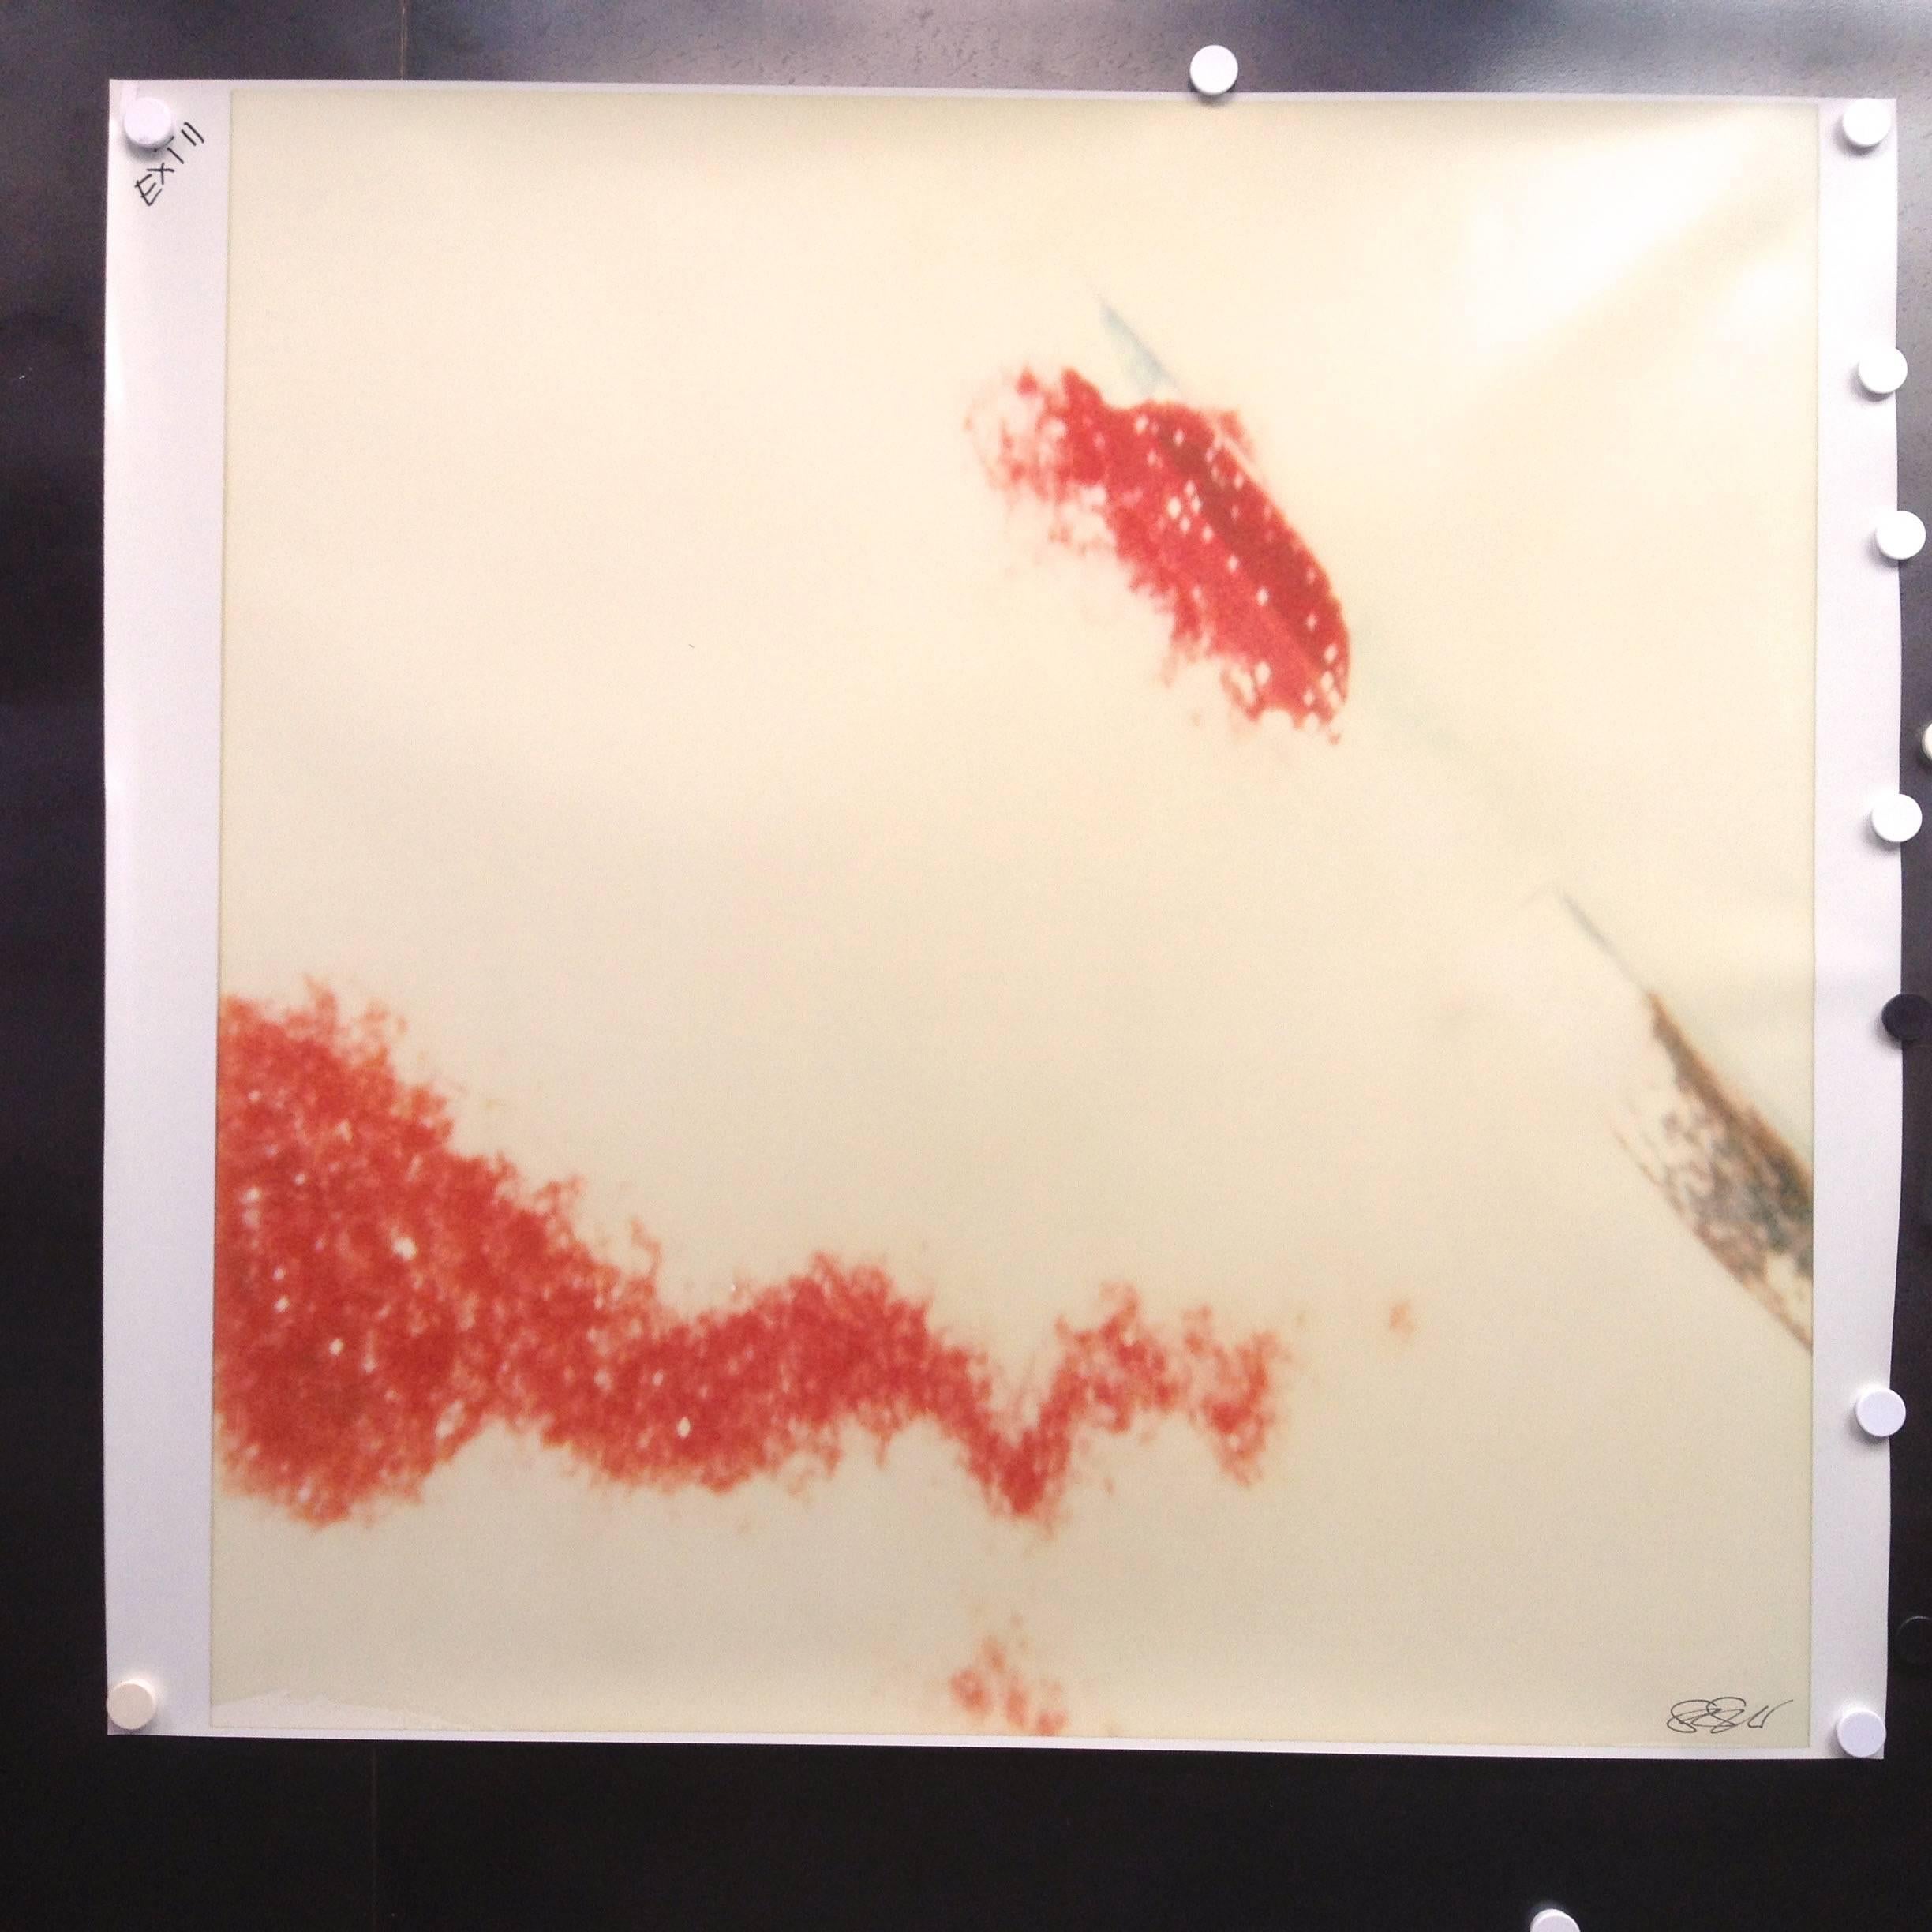 Traces from the series Frozen - based on a Polaroid Original - Proof  - Photograph by Stefanie Schneider